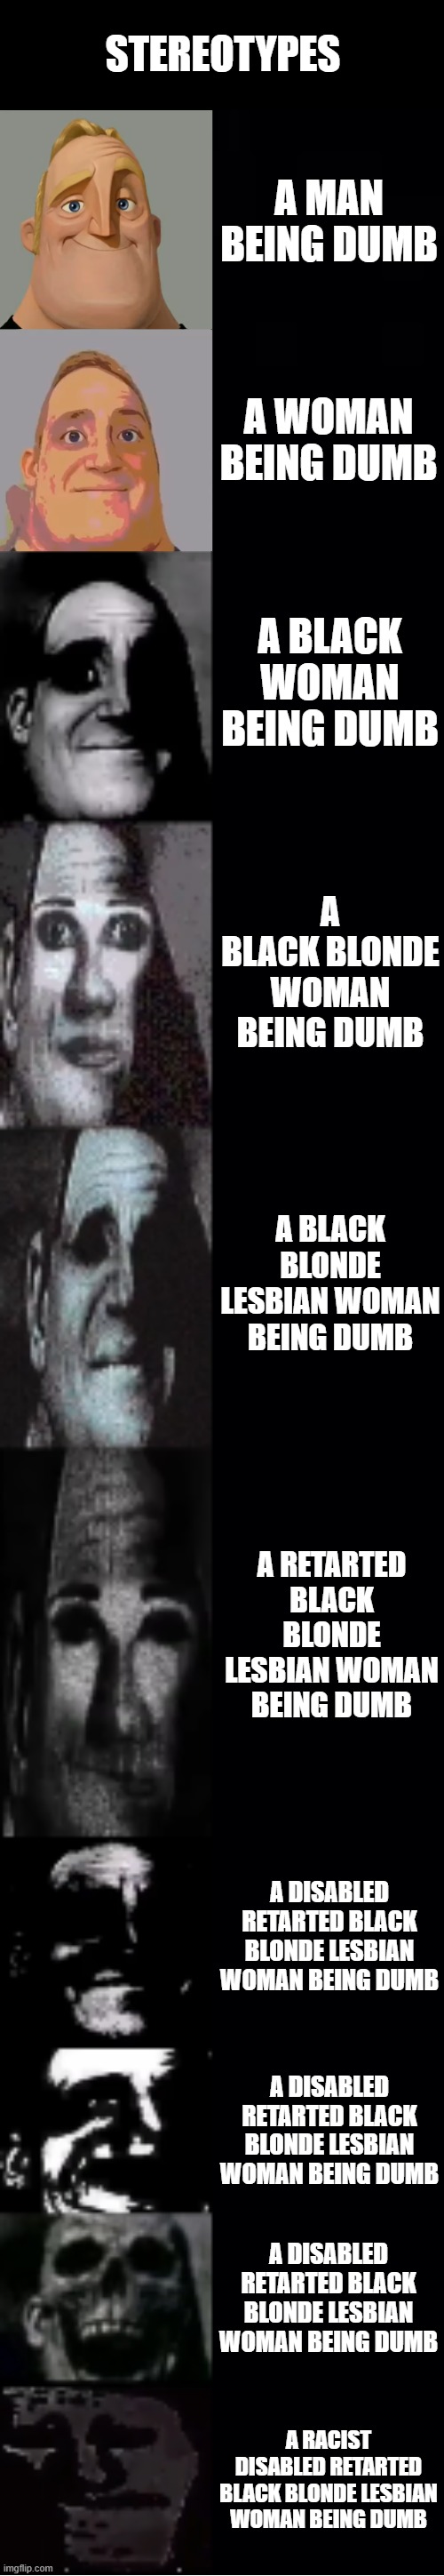 hi | STEREOTYPES; A MAN BEING DUMB; A WOMAN BEING DUMB; A BLACK WOMAN BEING DUMB; A BLACK BLONDE WOMAN BEING DUMB; A BLACK BLONDE LESBIAN WOMAN BEING DUMB; A RETARTED BLACK BLONDE LESBIAN WOMAN BEING DUMB; A DISABLED RETARTED BLACK BLONDE LESBIAN WOMAN BEING DUMB; A DISABLED RETARTED BLACK BLONDE LESBIAN WOMAN BEING DUMB; A DISABLED RETARTED BLACK BLONDE LESBIAN WOMAN BEING DUMB; A RACIST DISABLED RETARTED BLACK BLONDE LESBIAN WOMAN BEING DUMB | image tagged in mr incredible becoming uncanny | made w/ Imgflip meme maker